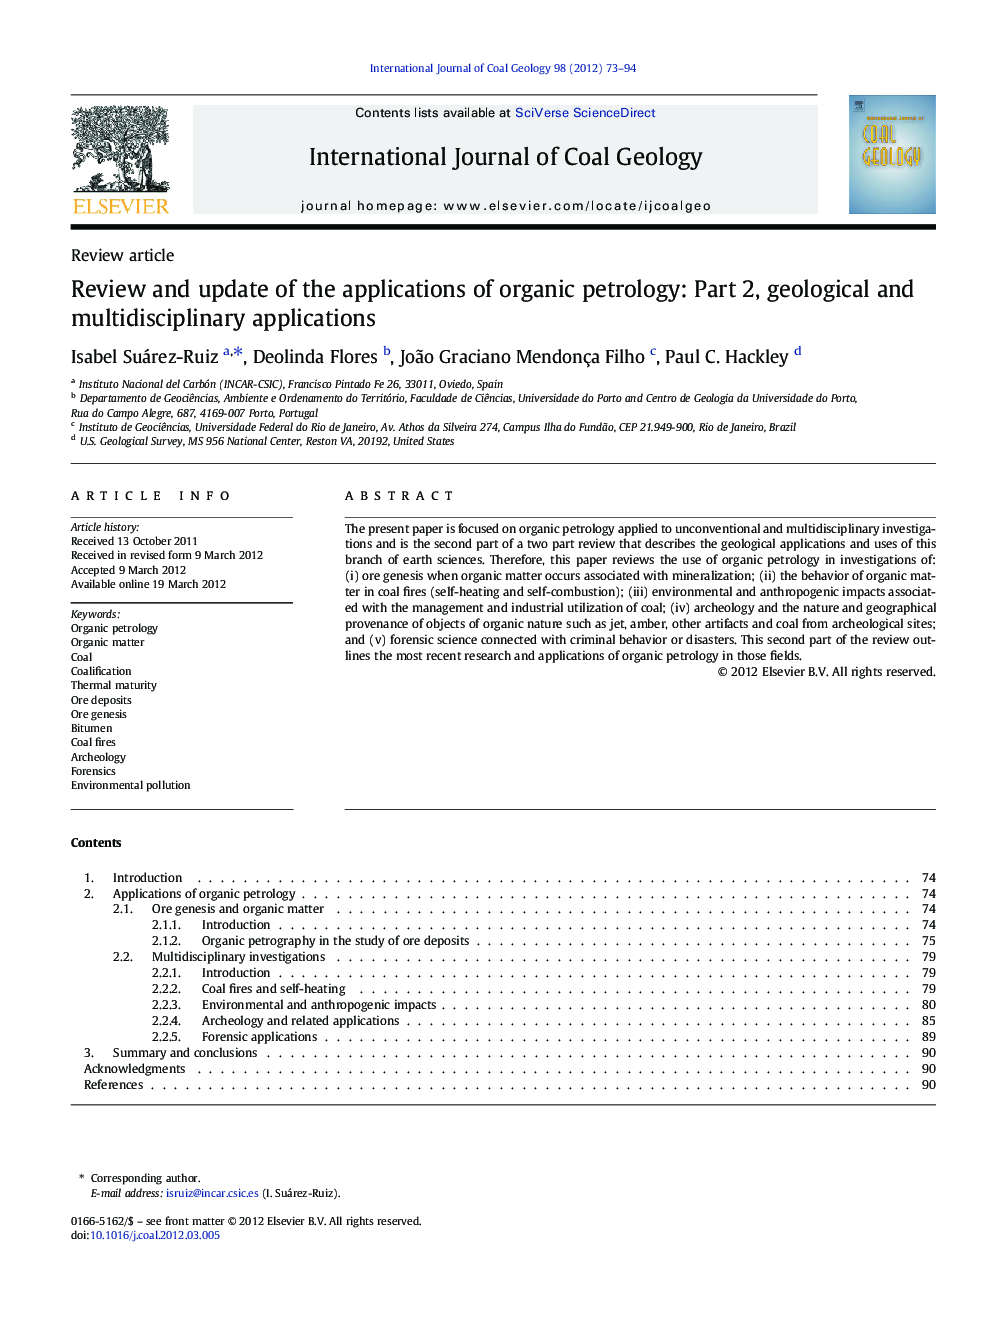 Review and update of the applications of organic petrology: Part 2, geological and multidisciplinary applications